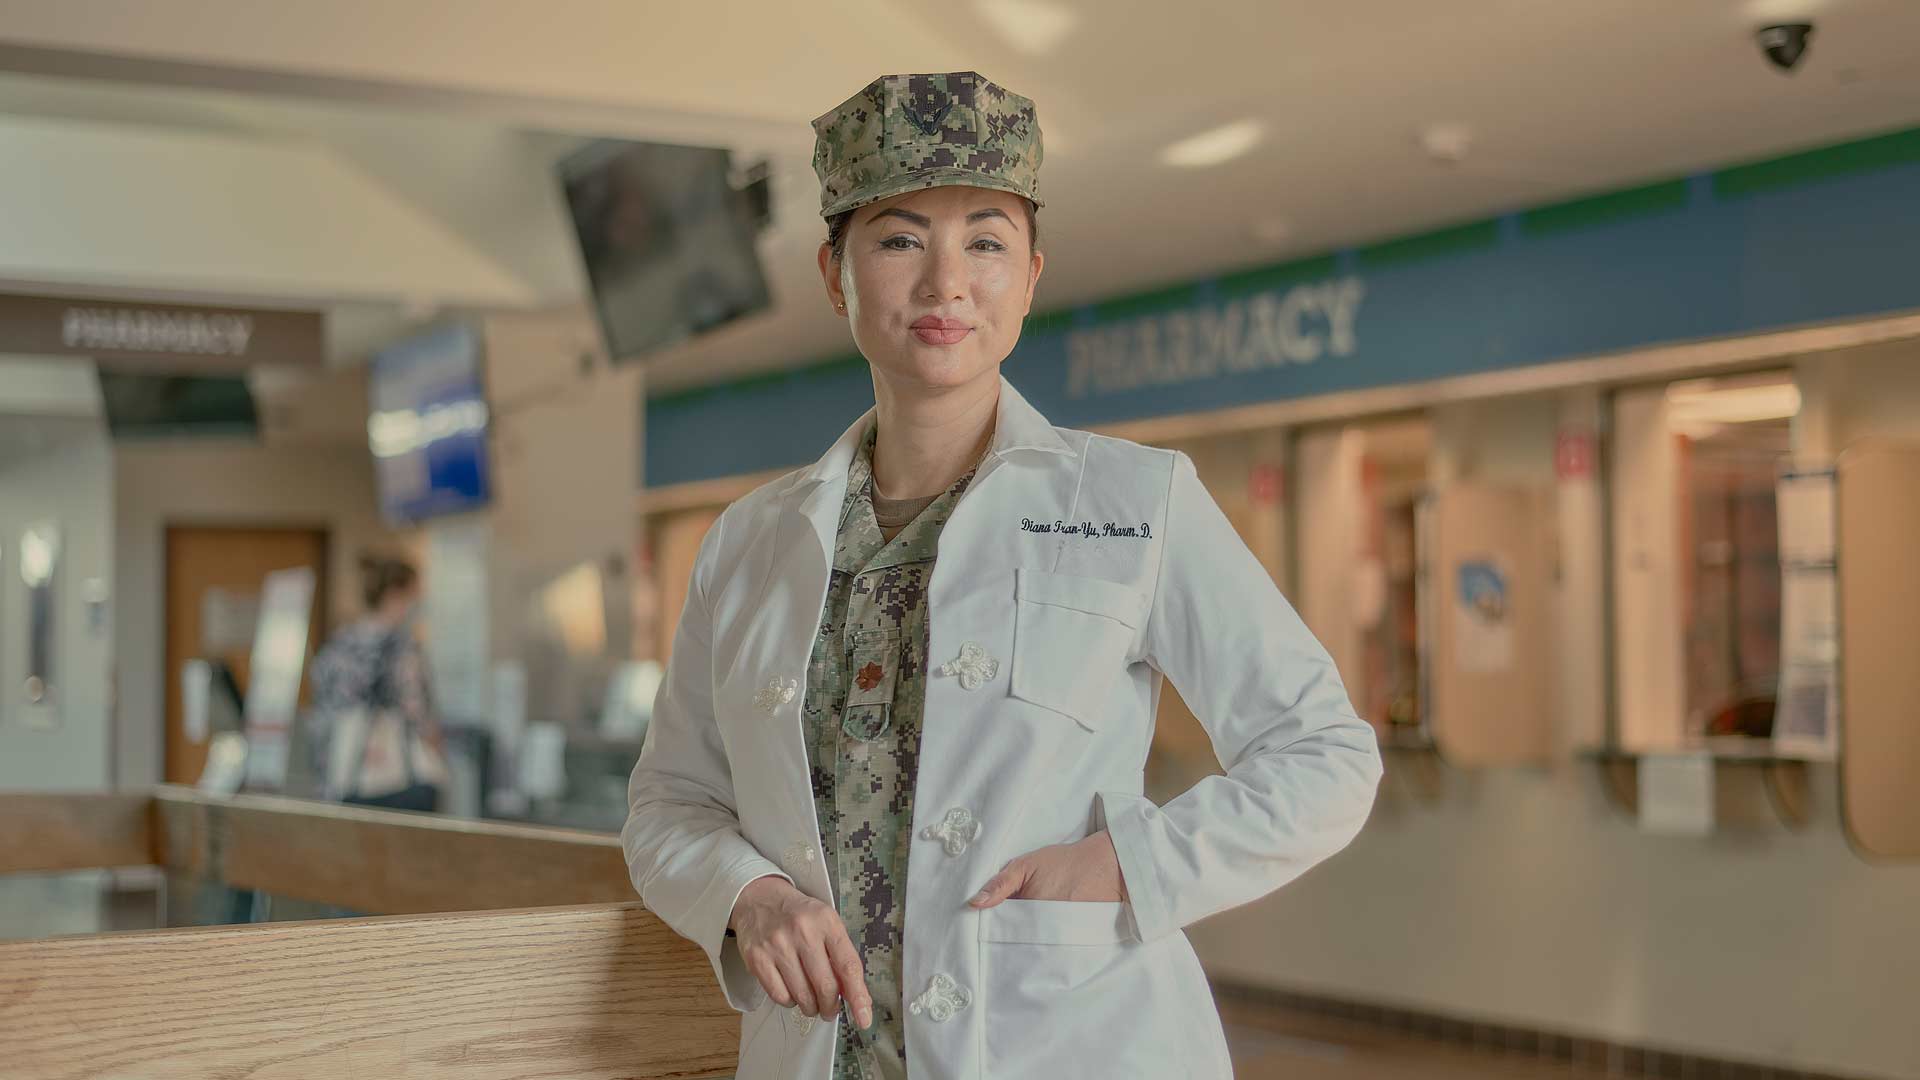 Diana Tran-Yu, a Navy Health Care Administrator and former Navy Pharmacist, serves at Walter Reed Medical Center in Bethesda, Maryland